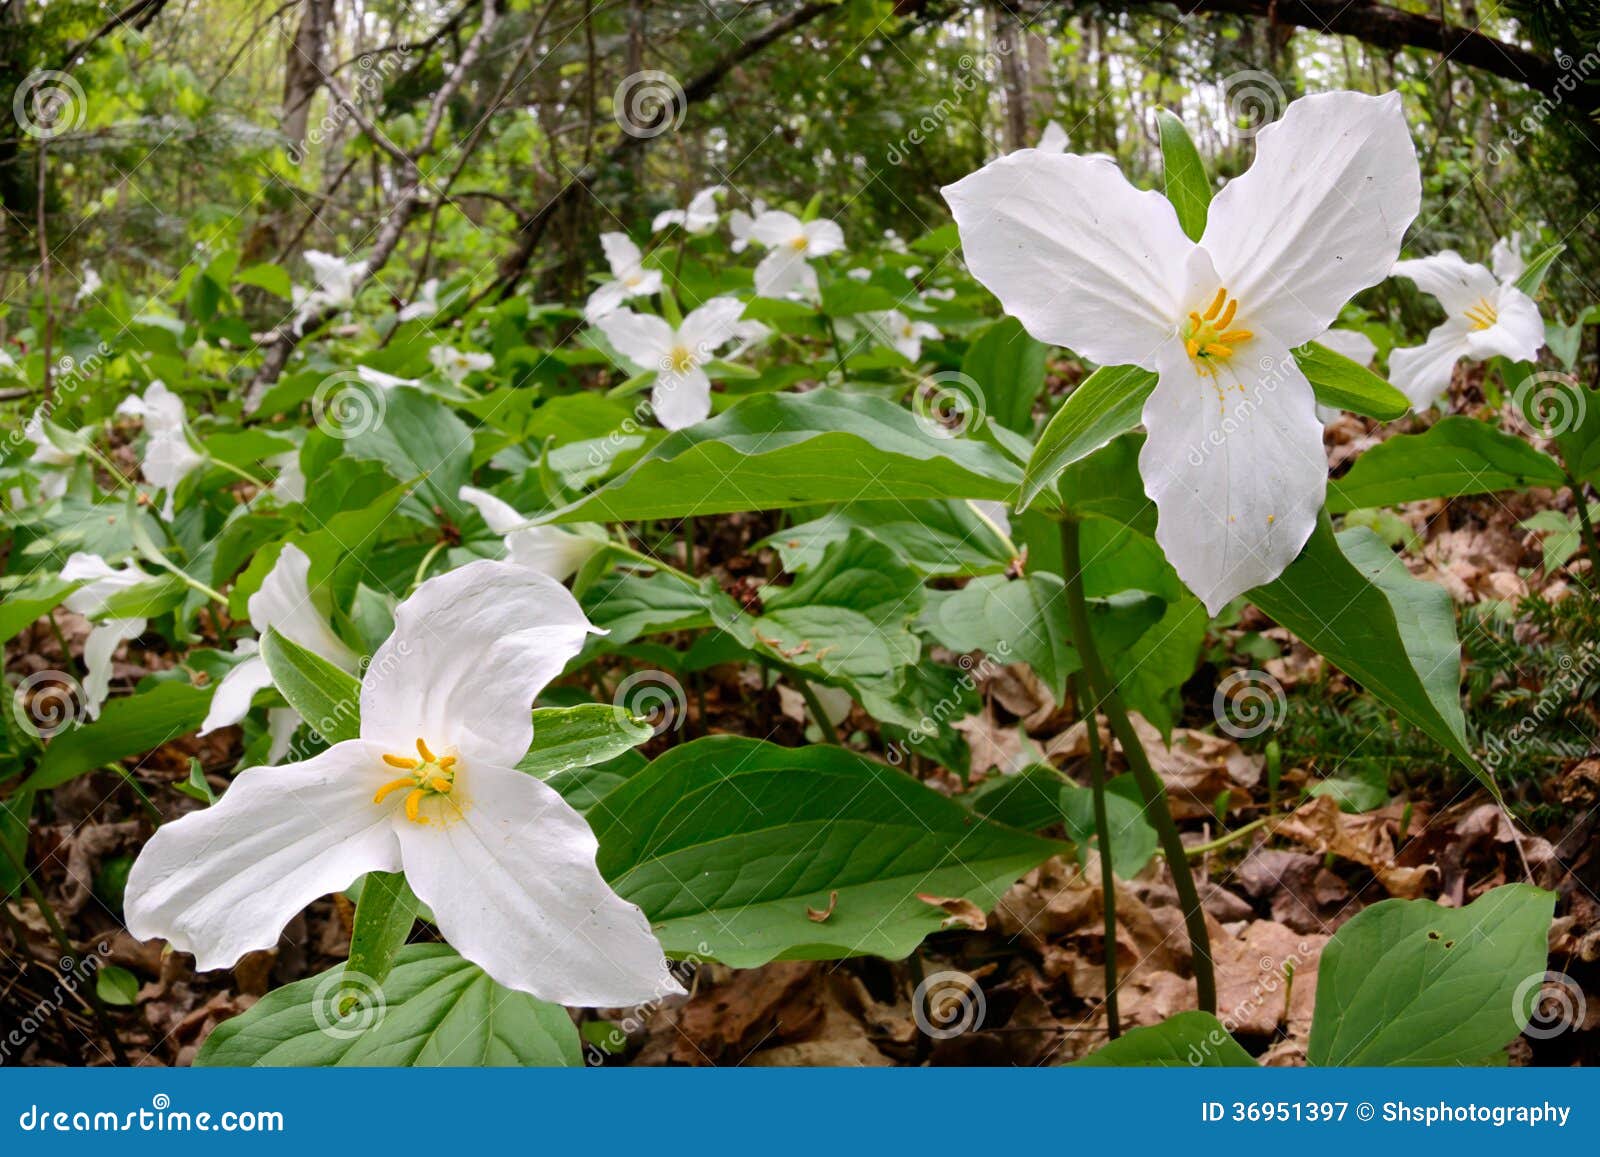 trillium bed - low angle